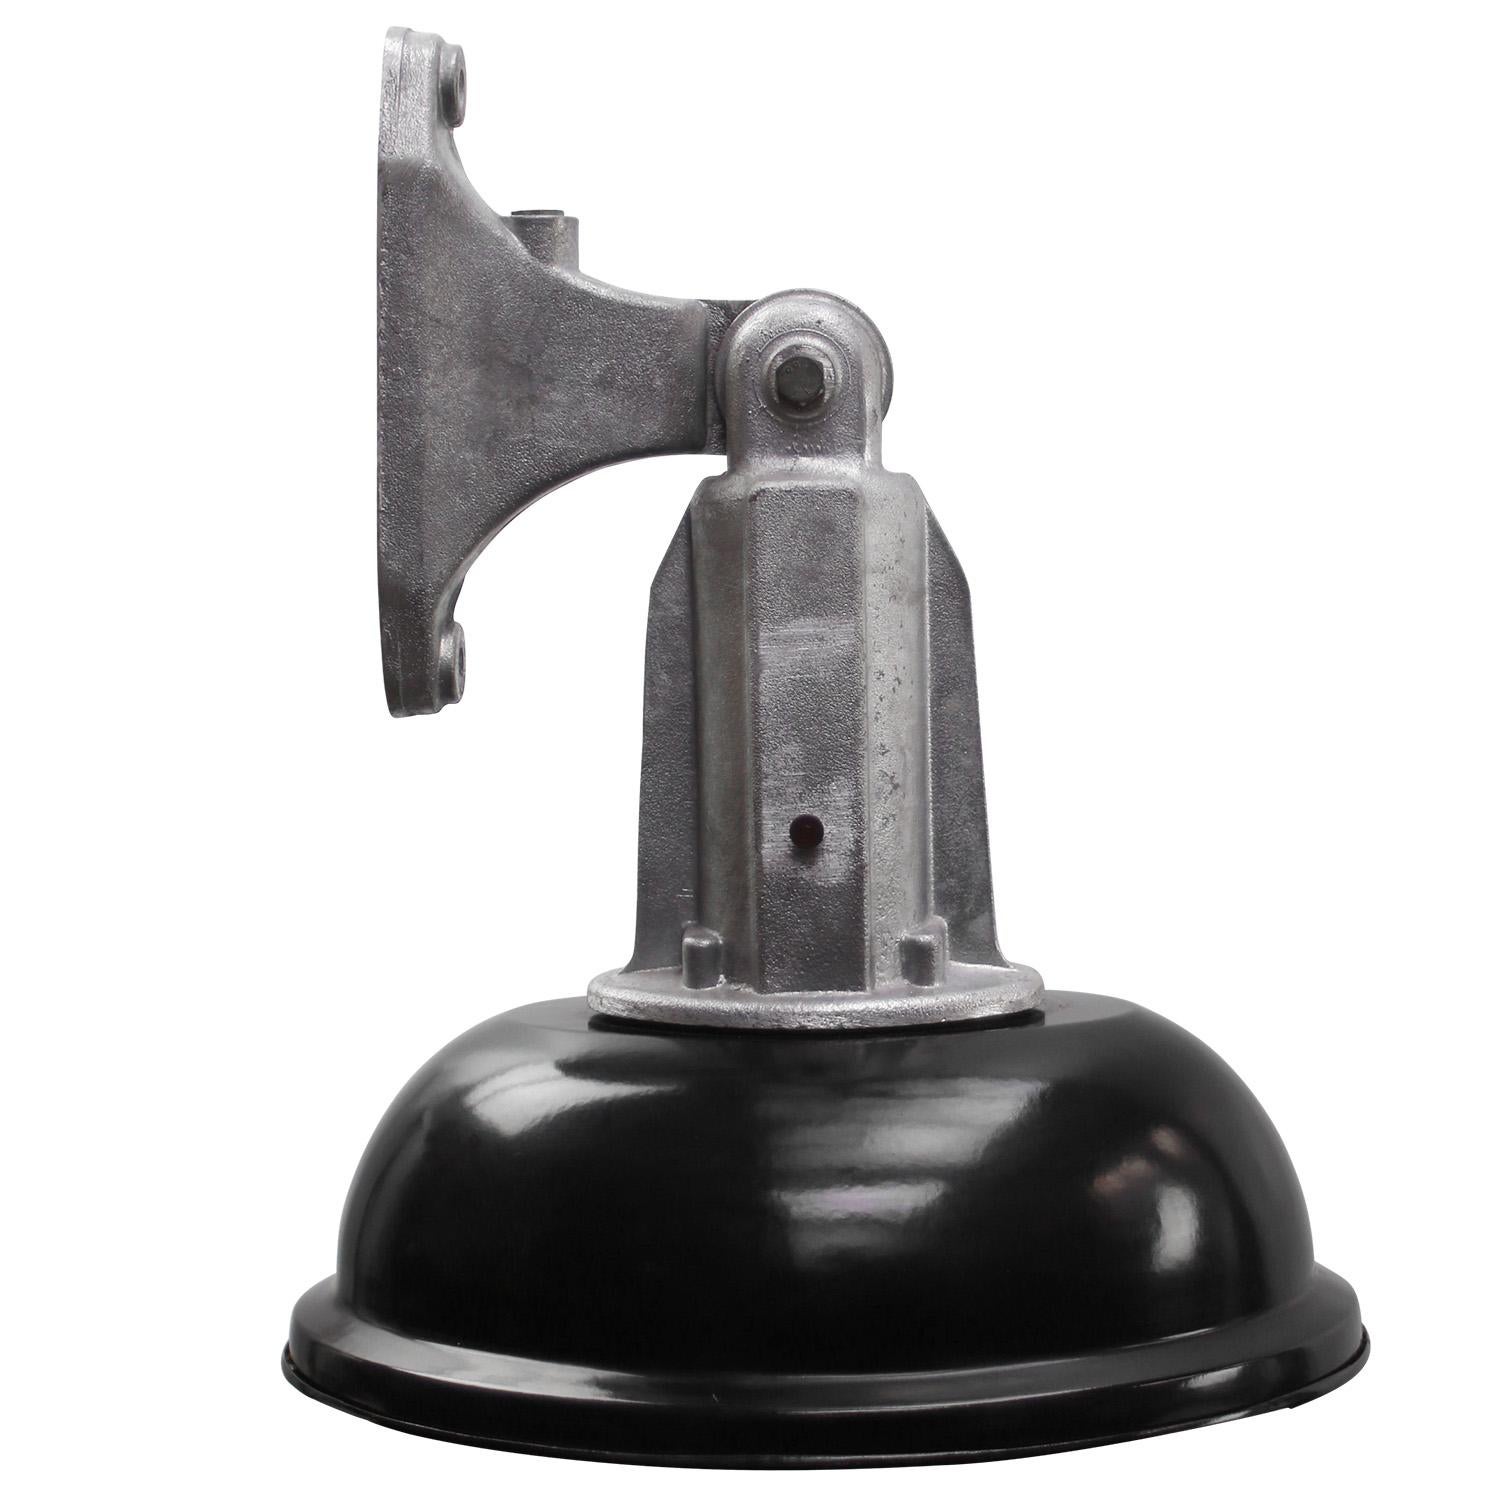 French industrial wall light.
Cast aluminium wall pieces with black enamel shade.

Size wall mount 25 × 6 cm

Weight: 3.20 kg / 7.1 lb

Priced per individual item. All lamps have been made suitable by international standards for incandescent light